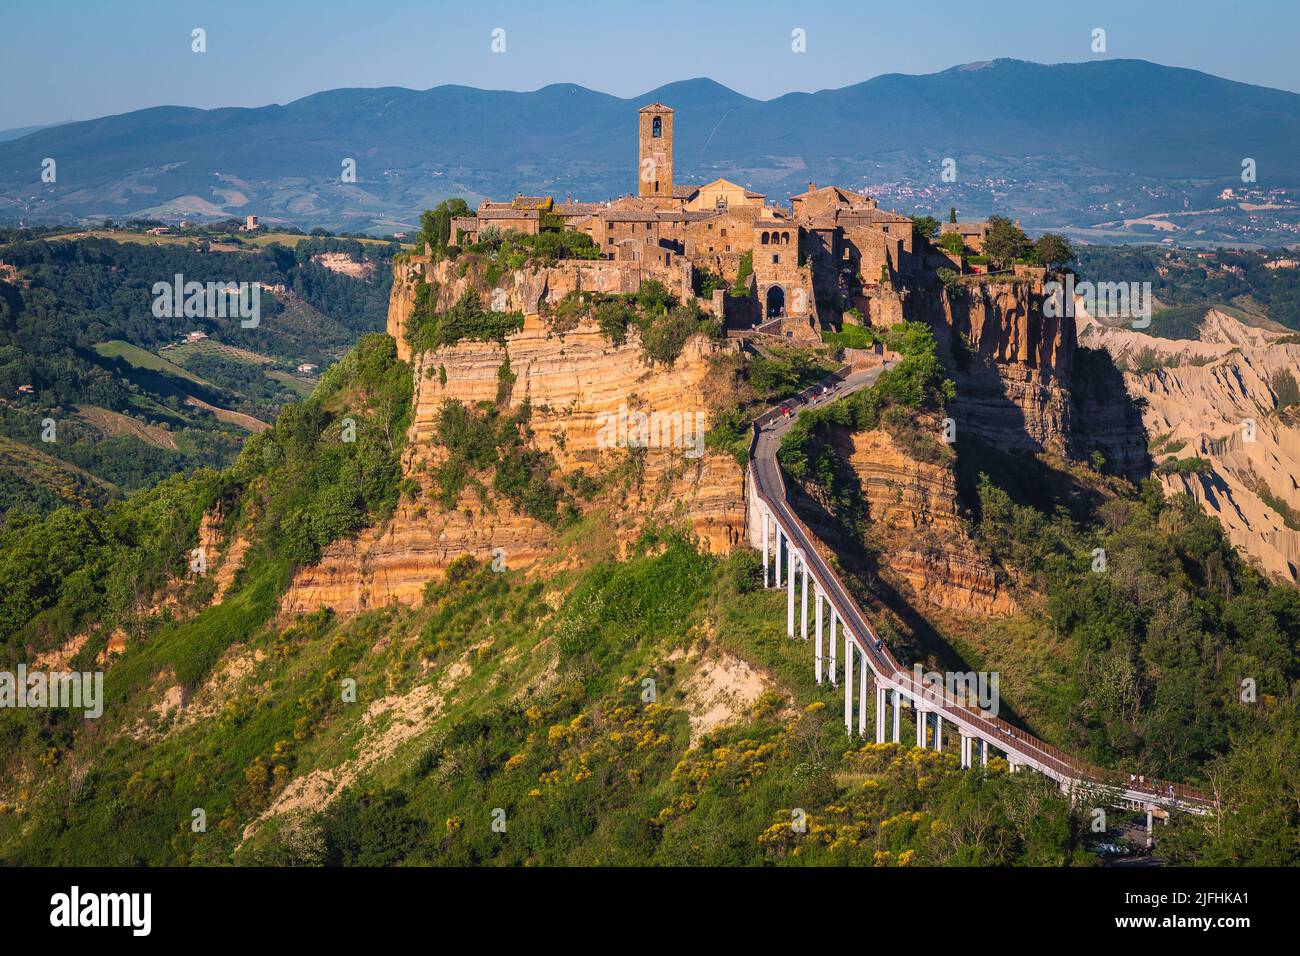 Stunning panoramic view with famous Civita di Bagnoregio medieval village on the cliffs at sunset, Lazio, Italy, Europe Stock Photo